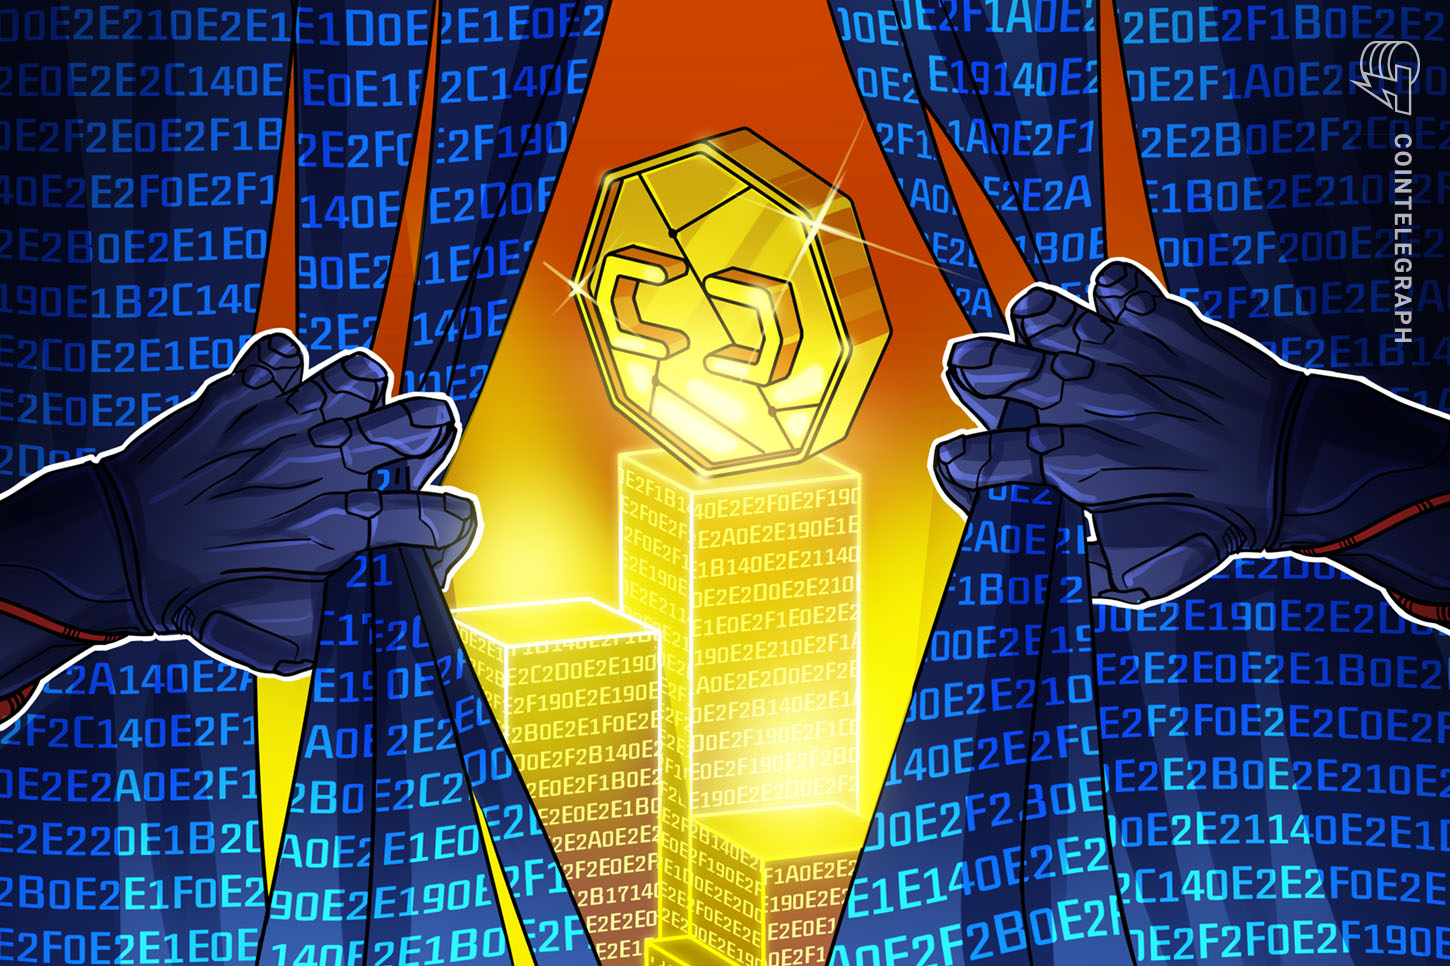 Japanese Europe’s sixth-largest crypto service is a darknet market